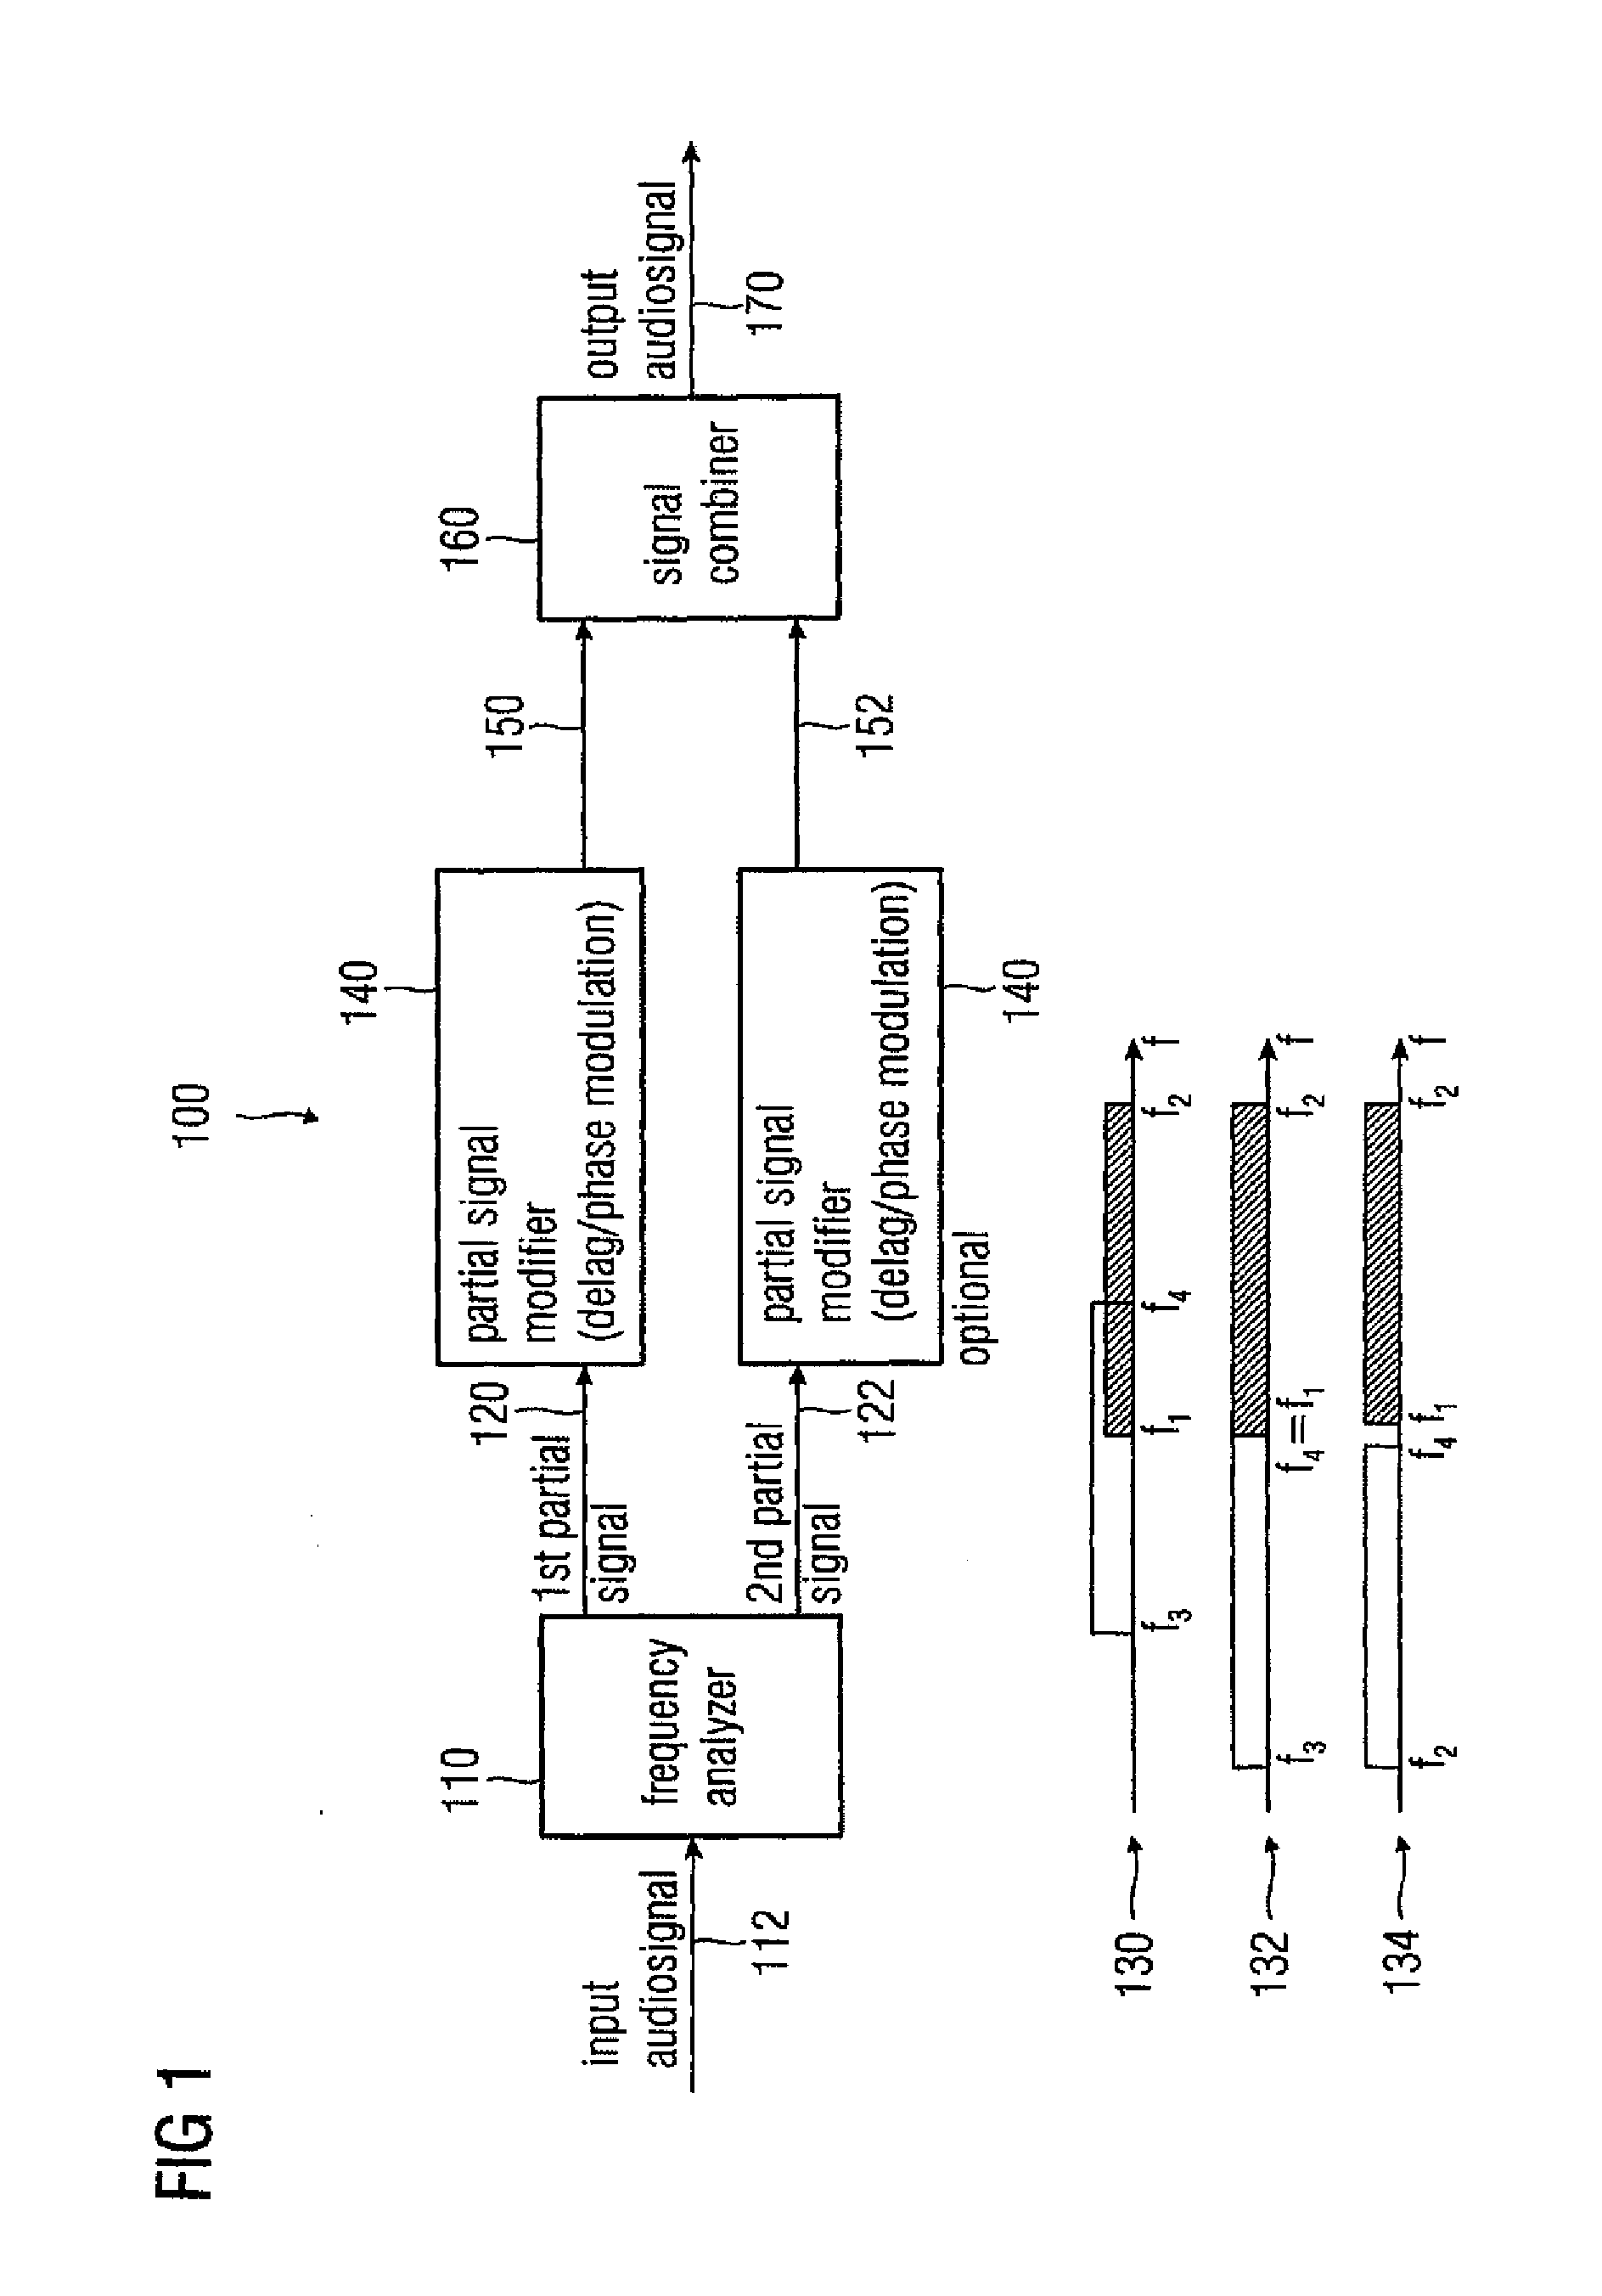 Audio signal decorrelator, multi channel audio signal processor, audio signal processor, method for deriving an output audio signal from an input audio signal and computer program